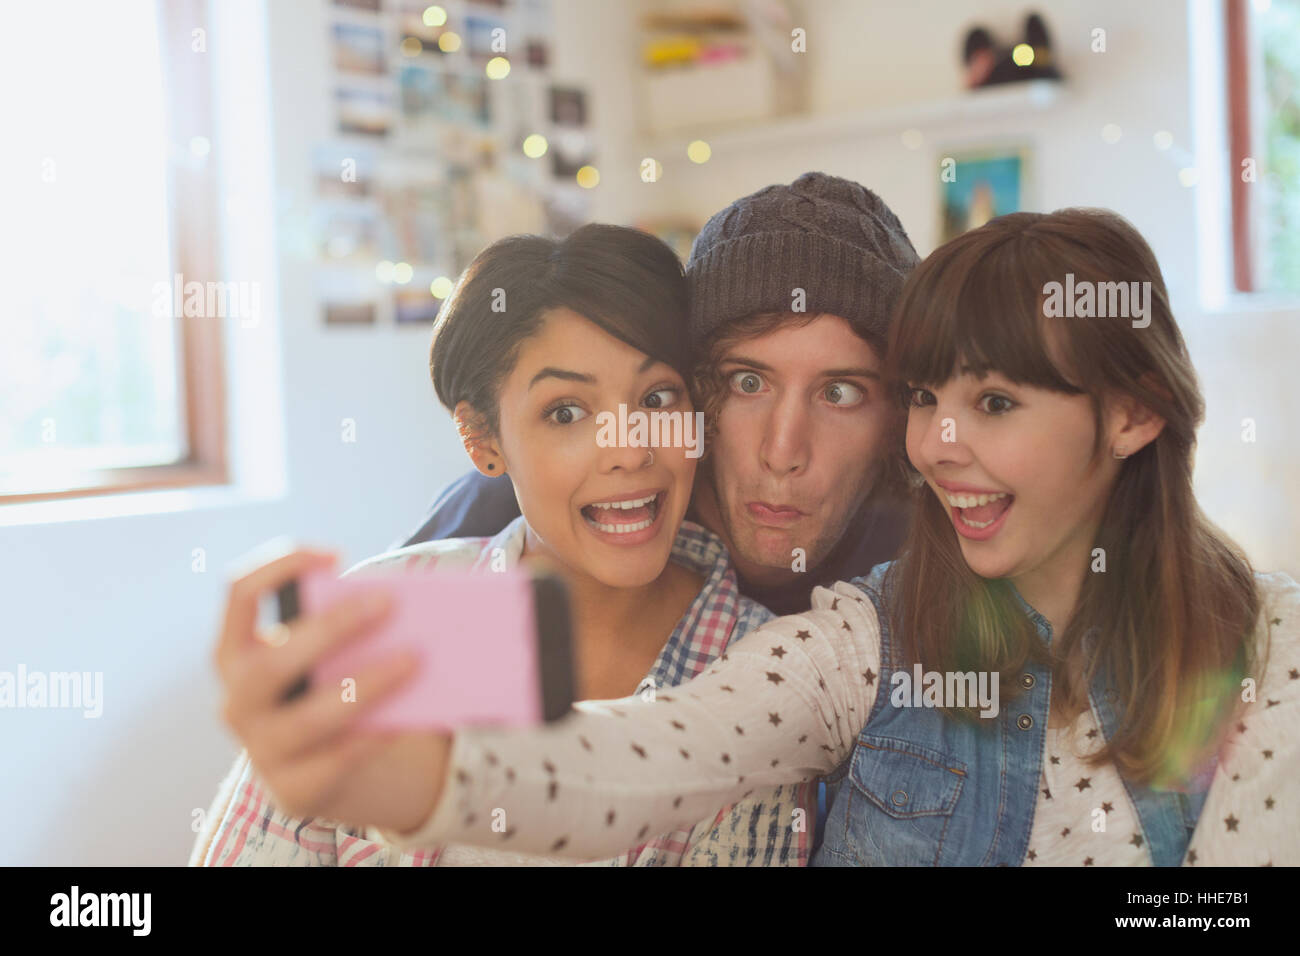 Playful young friends taking selfie making silly faces Stock Photo